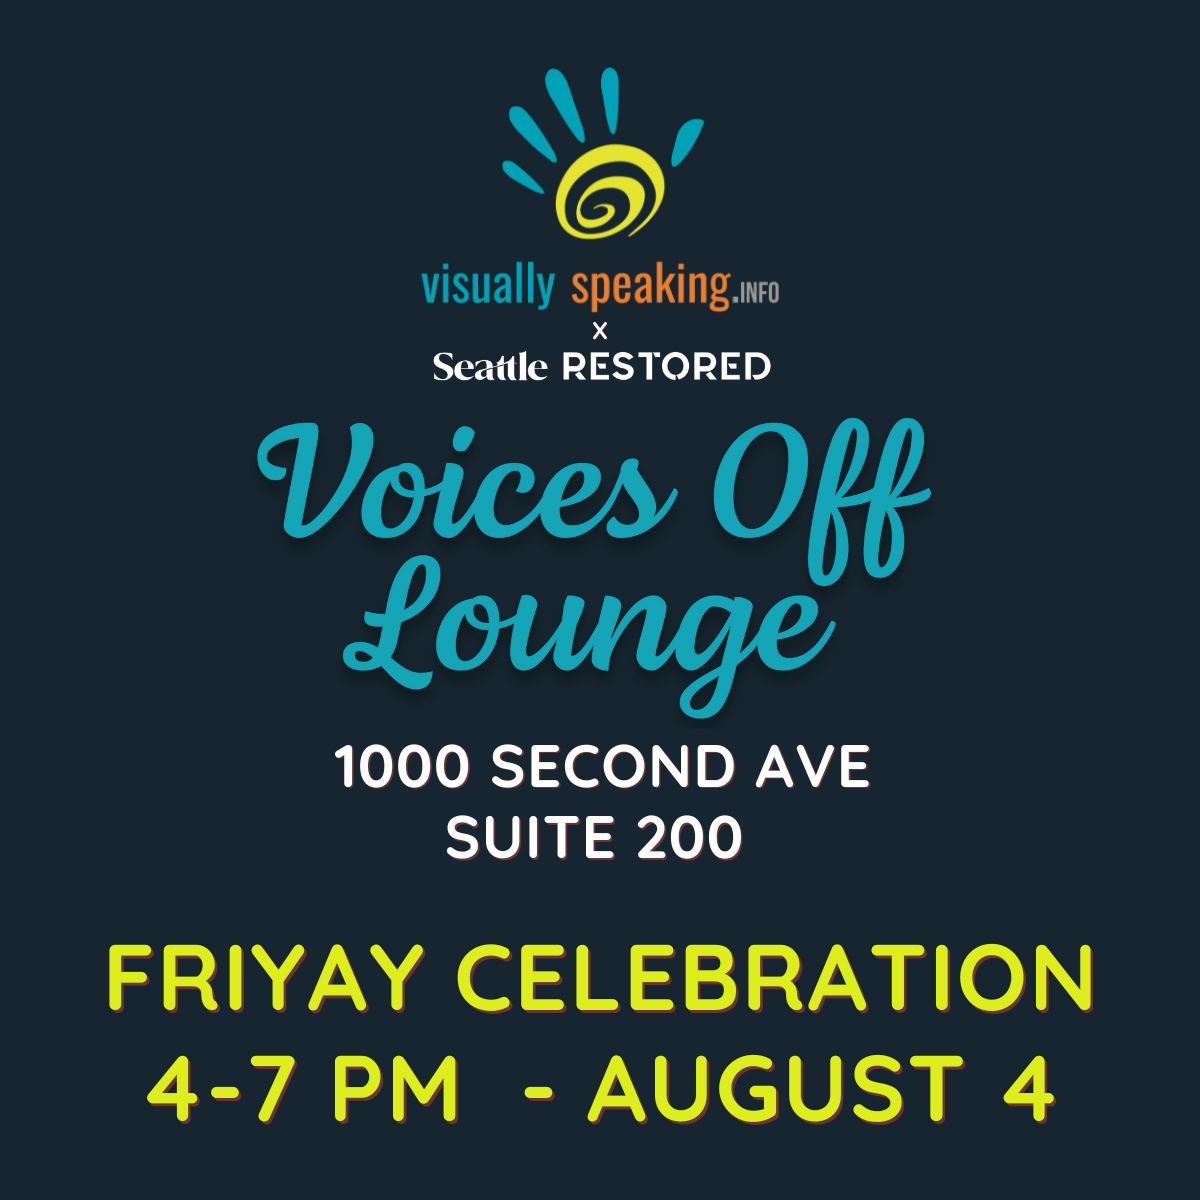 ID: Dark blue background with Visually Speaking logo X Seattle Restored at top center. Centered text in light blue states Voices Off Lounge. Beneath is white text 1000 Second Ave Suite 200 and yellow text reads Friyay celebration 4-7 PM - August 4